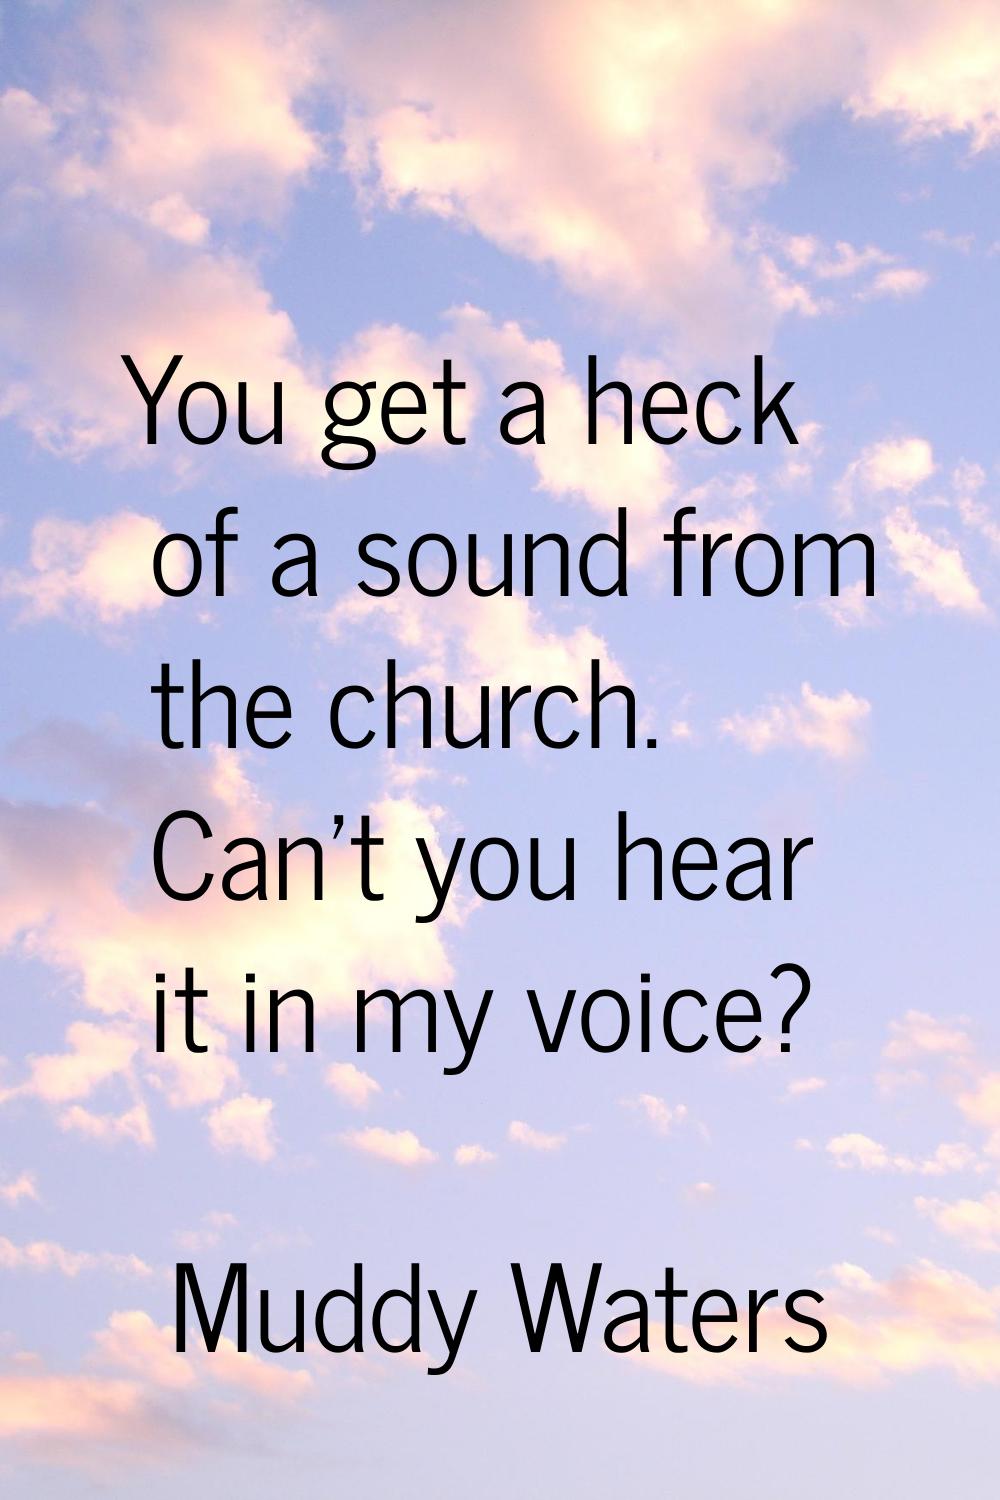 You get a heck of a sound from the church. Can't you hear it in my voice?